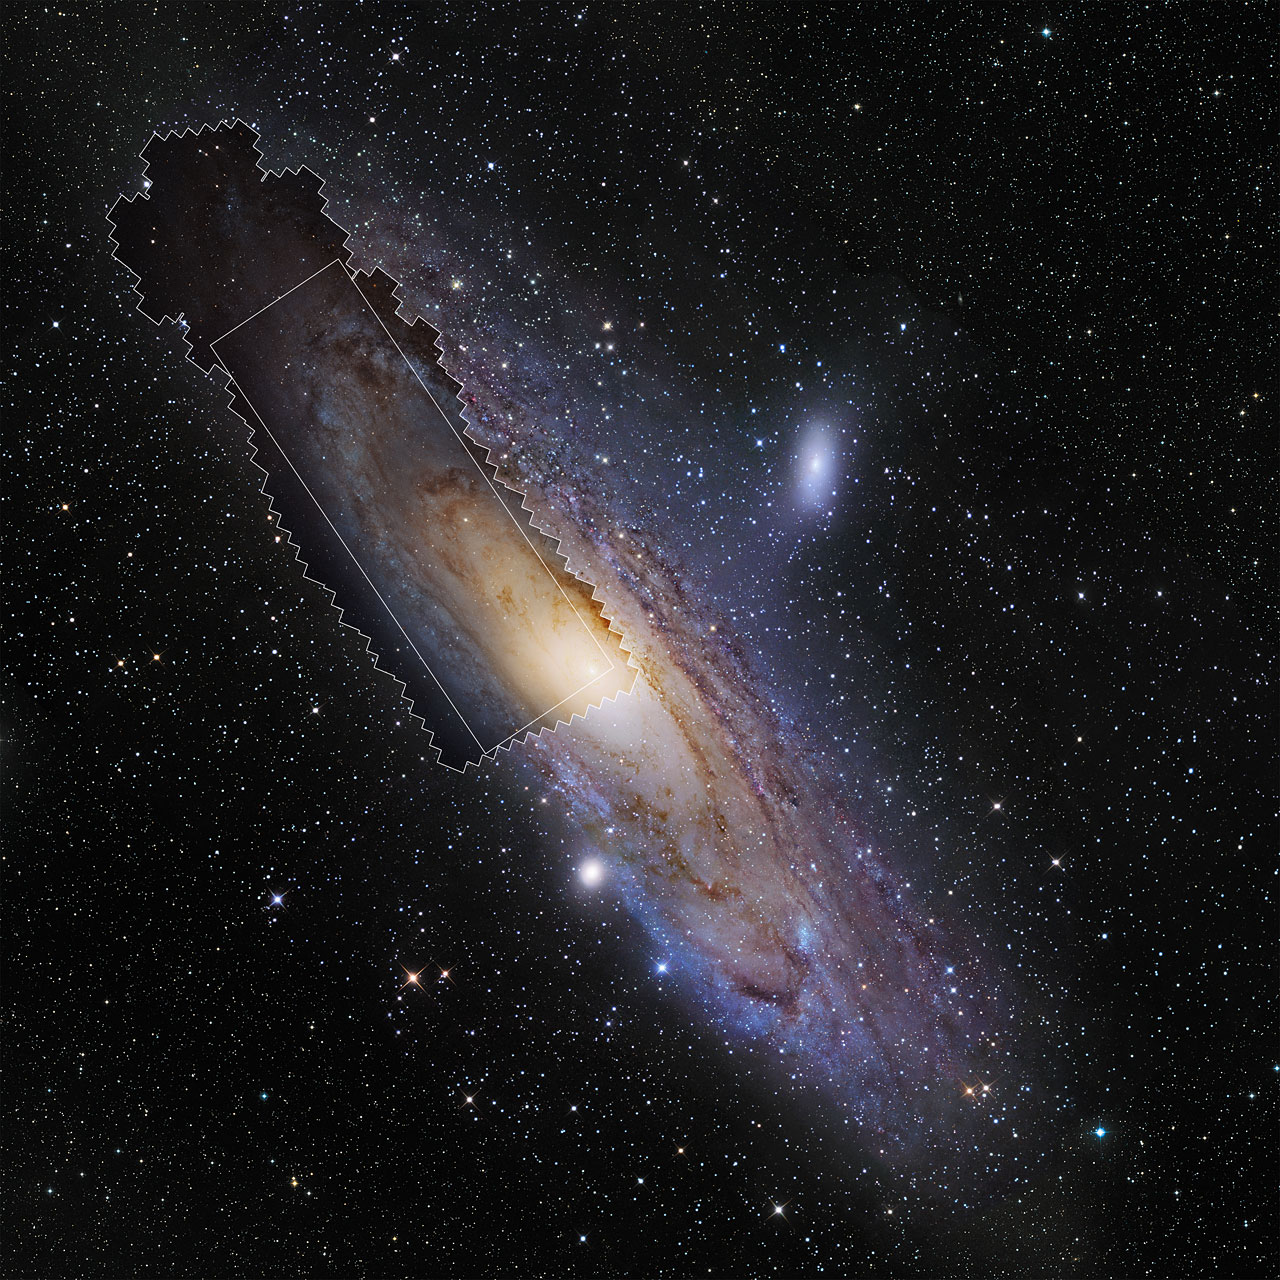 Wide-field view of the Andromeda Galaxy showing the extent of th